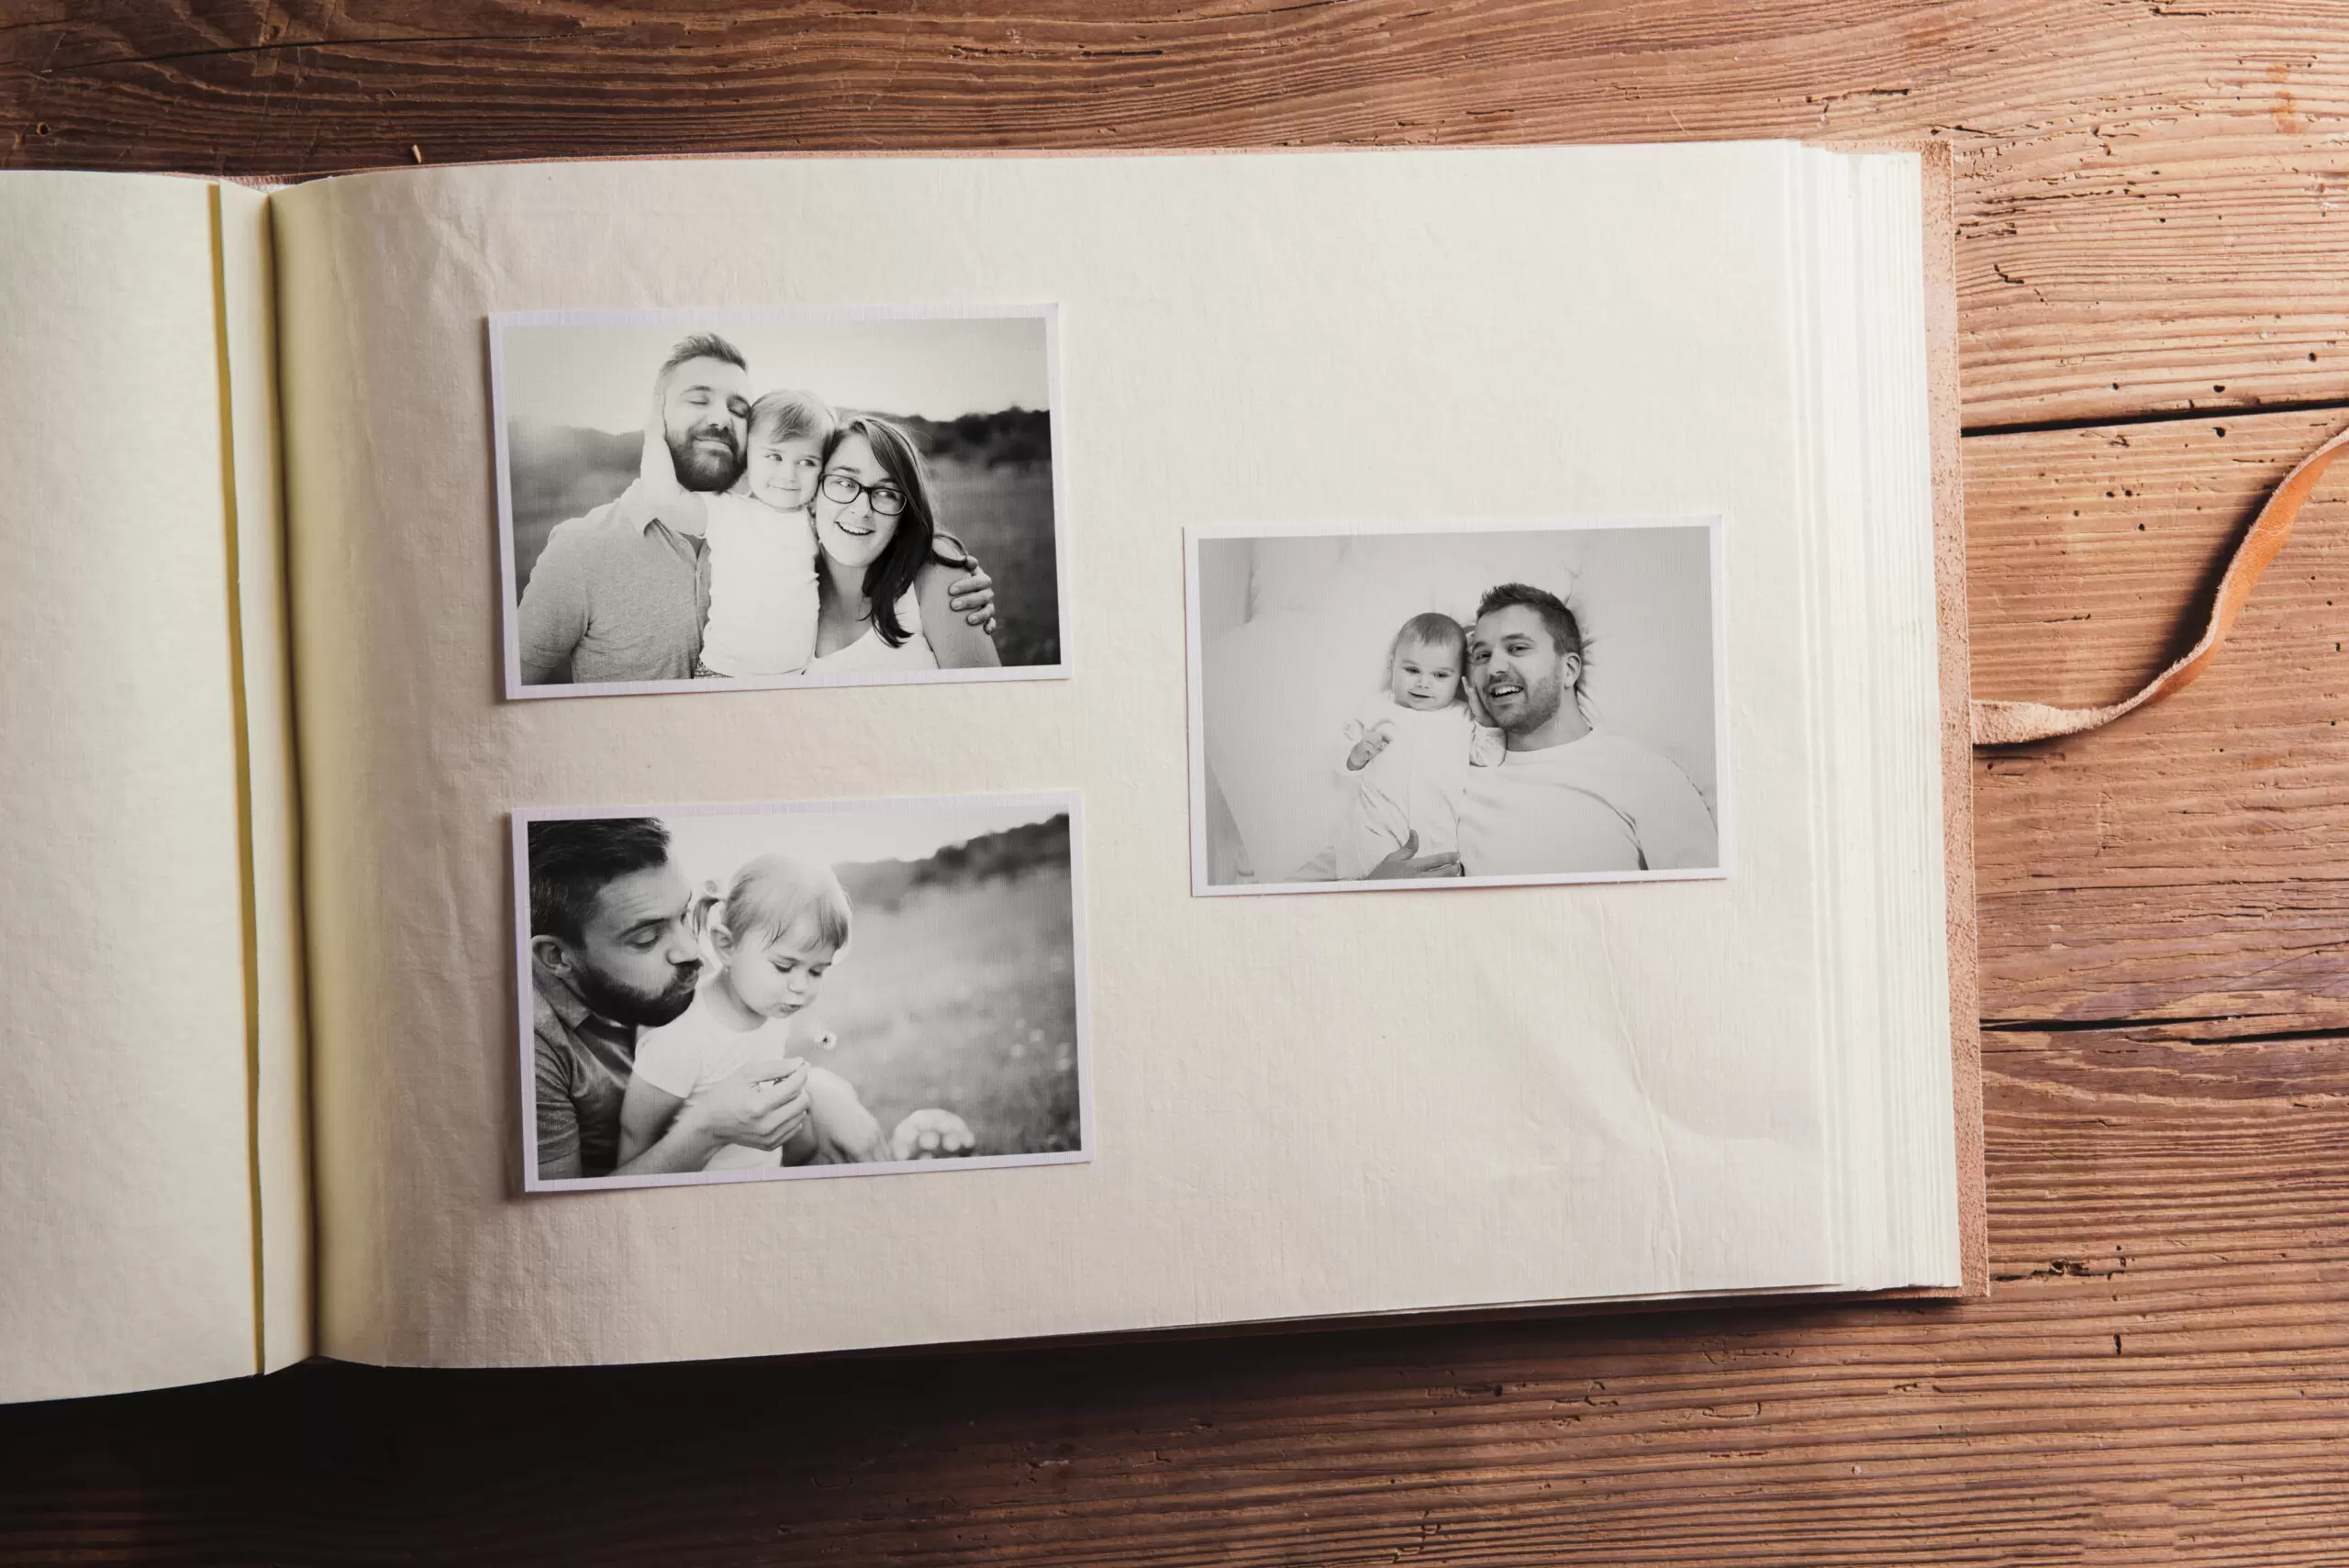 graphicstock-photo-album-with-black-and-white-family-pictures-studio-shot-on-wooden-background_SA2fM3T-Z-scaled